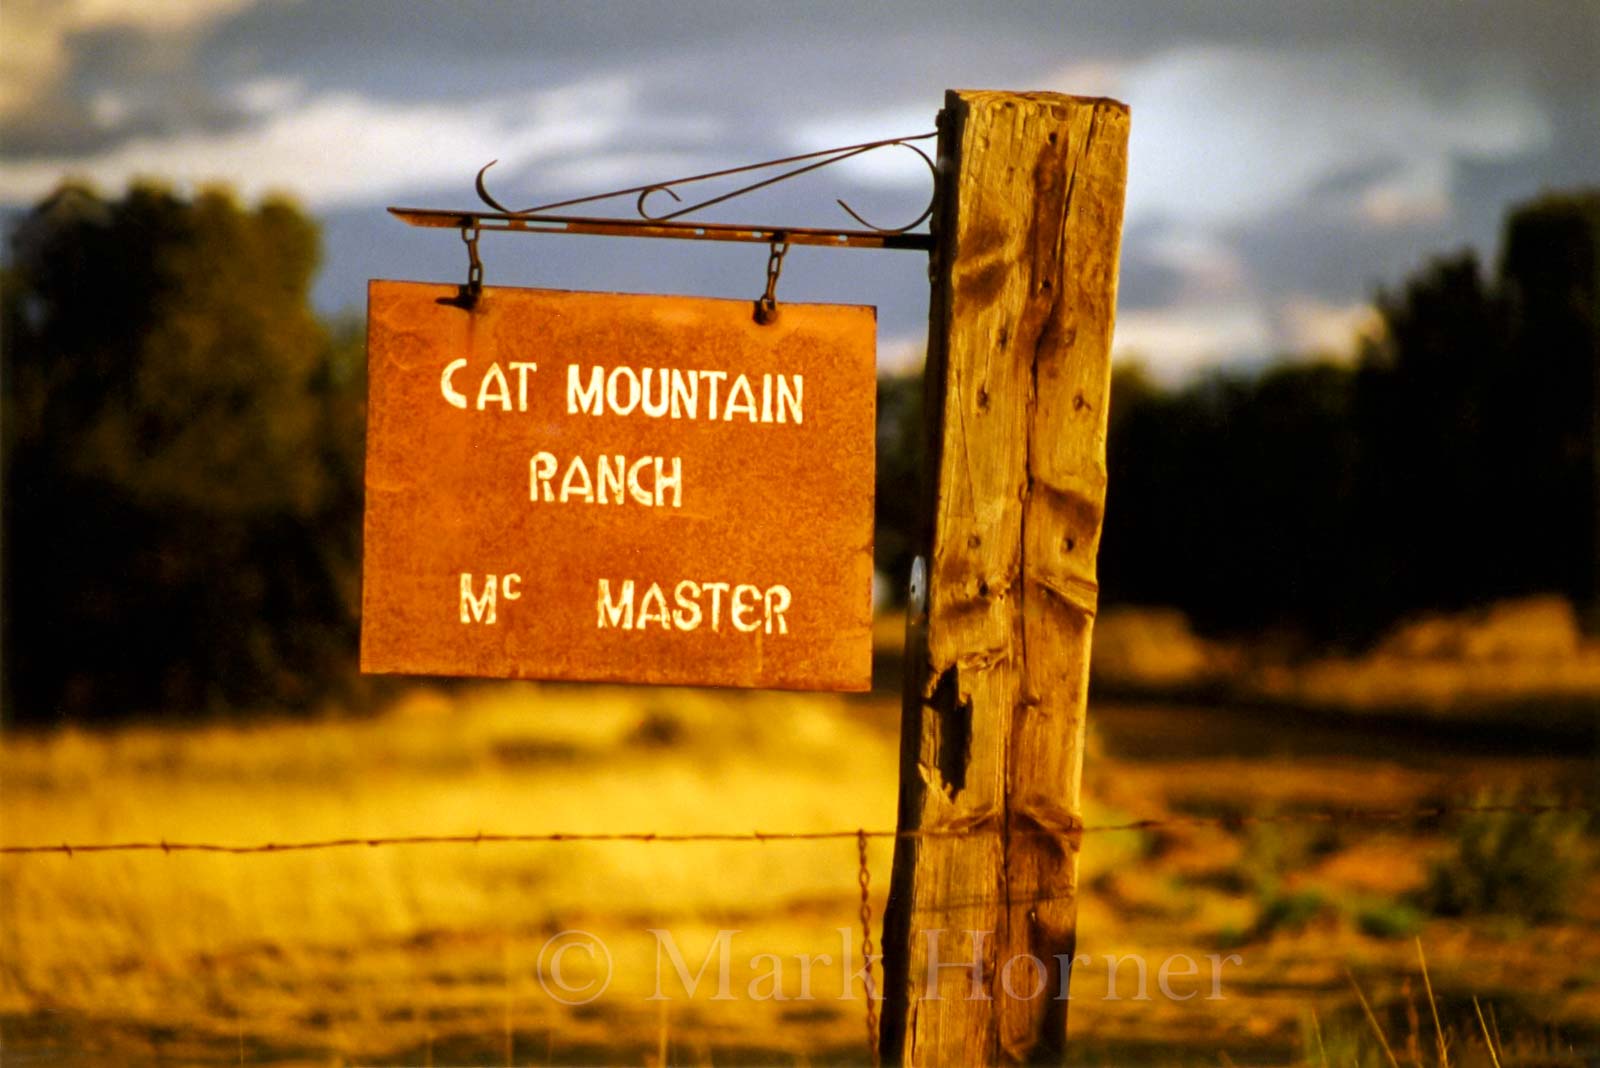 Cat Mountain Ranch sign